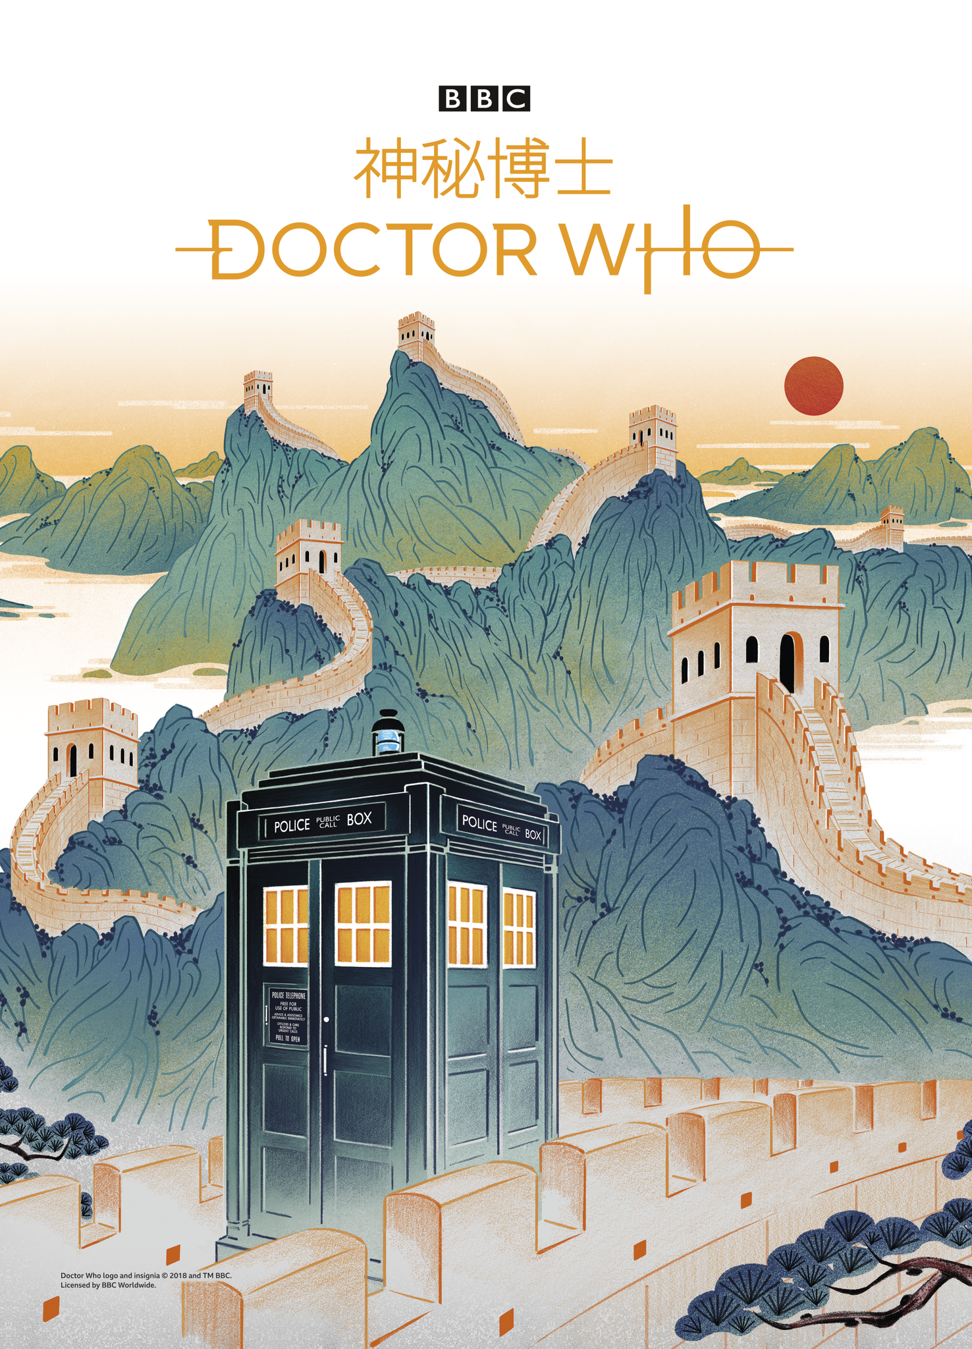 Dr Who’s time machine, the Tardis, makes an appearance at the Great Wall of China. Photo: BBC